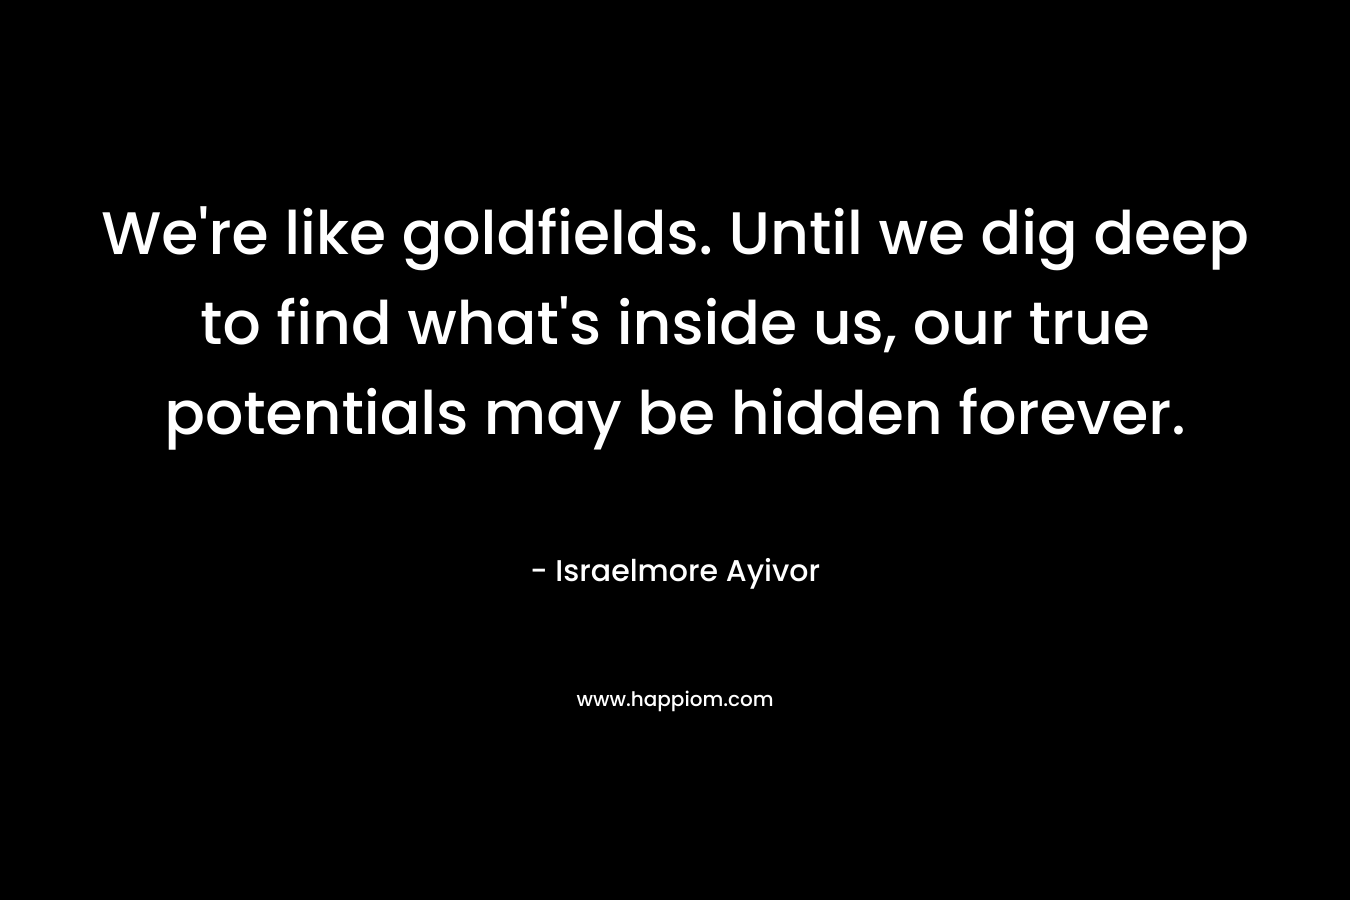 We’re like goldfields. Until we dig deep to find what’s inside us, our true potentials may be hidden forever. – Israelmore Ayivor